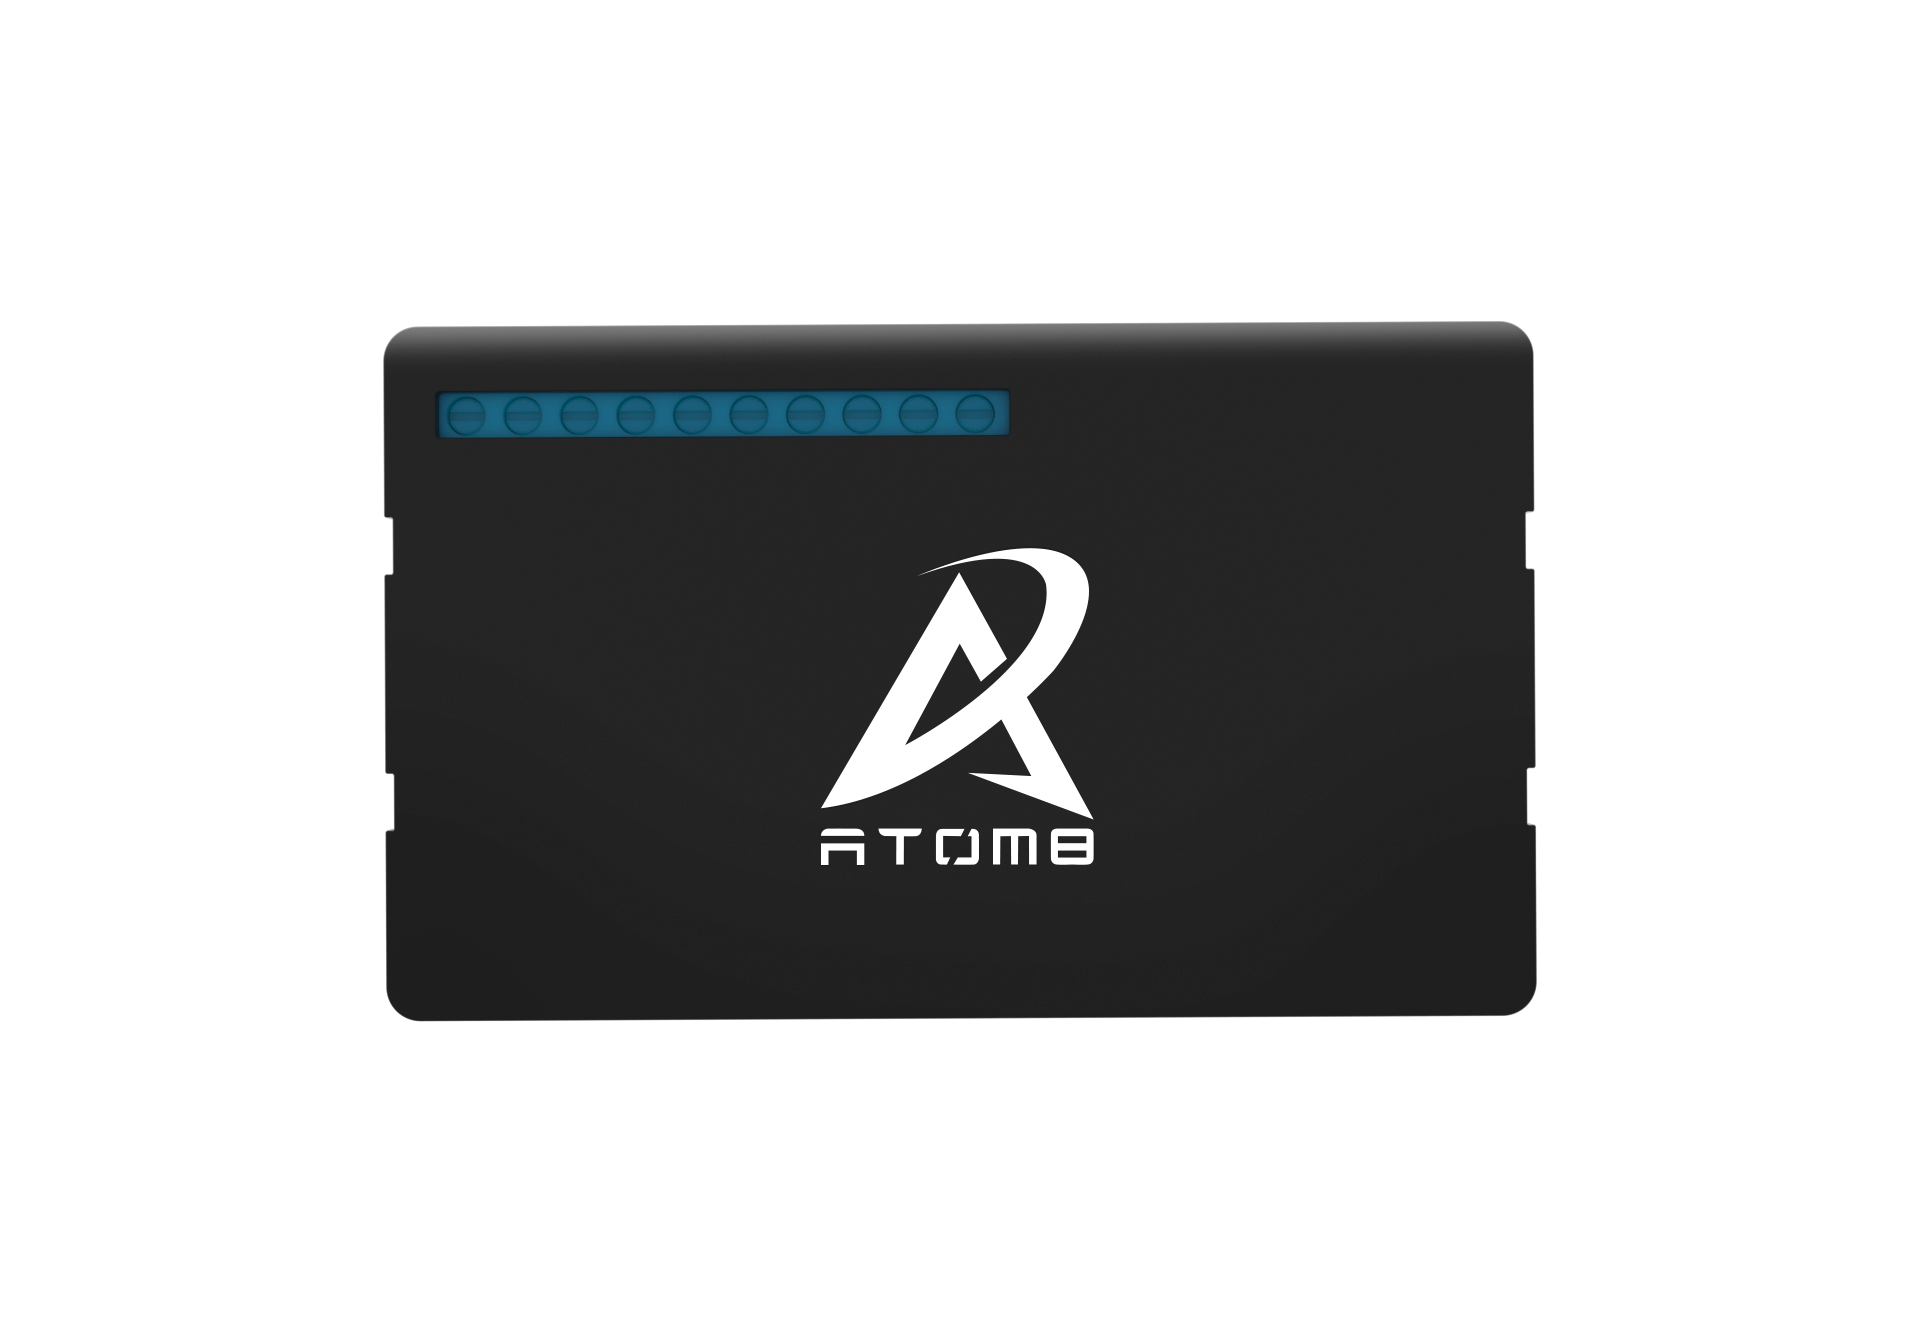 Atom8 Duo - 2 Node Retrofit Wifi Smart Switch compatible with alexa and google home